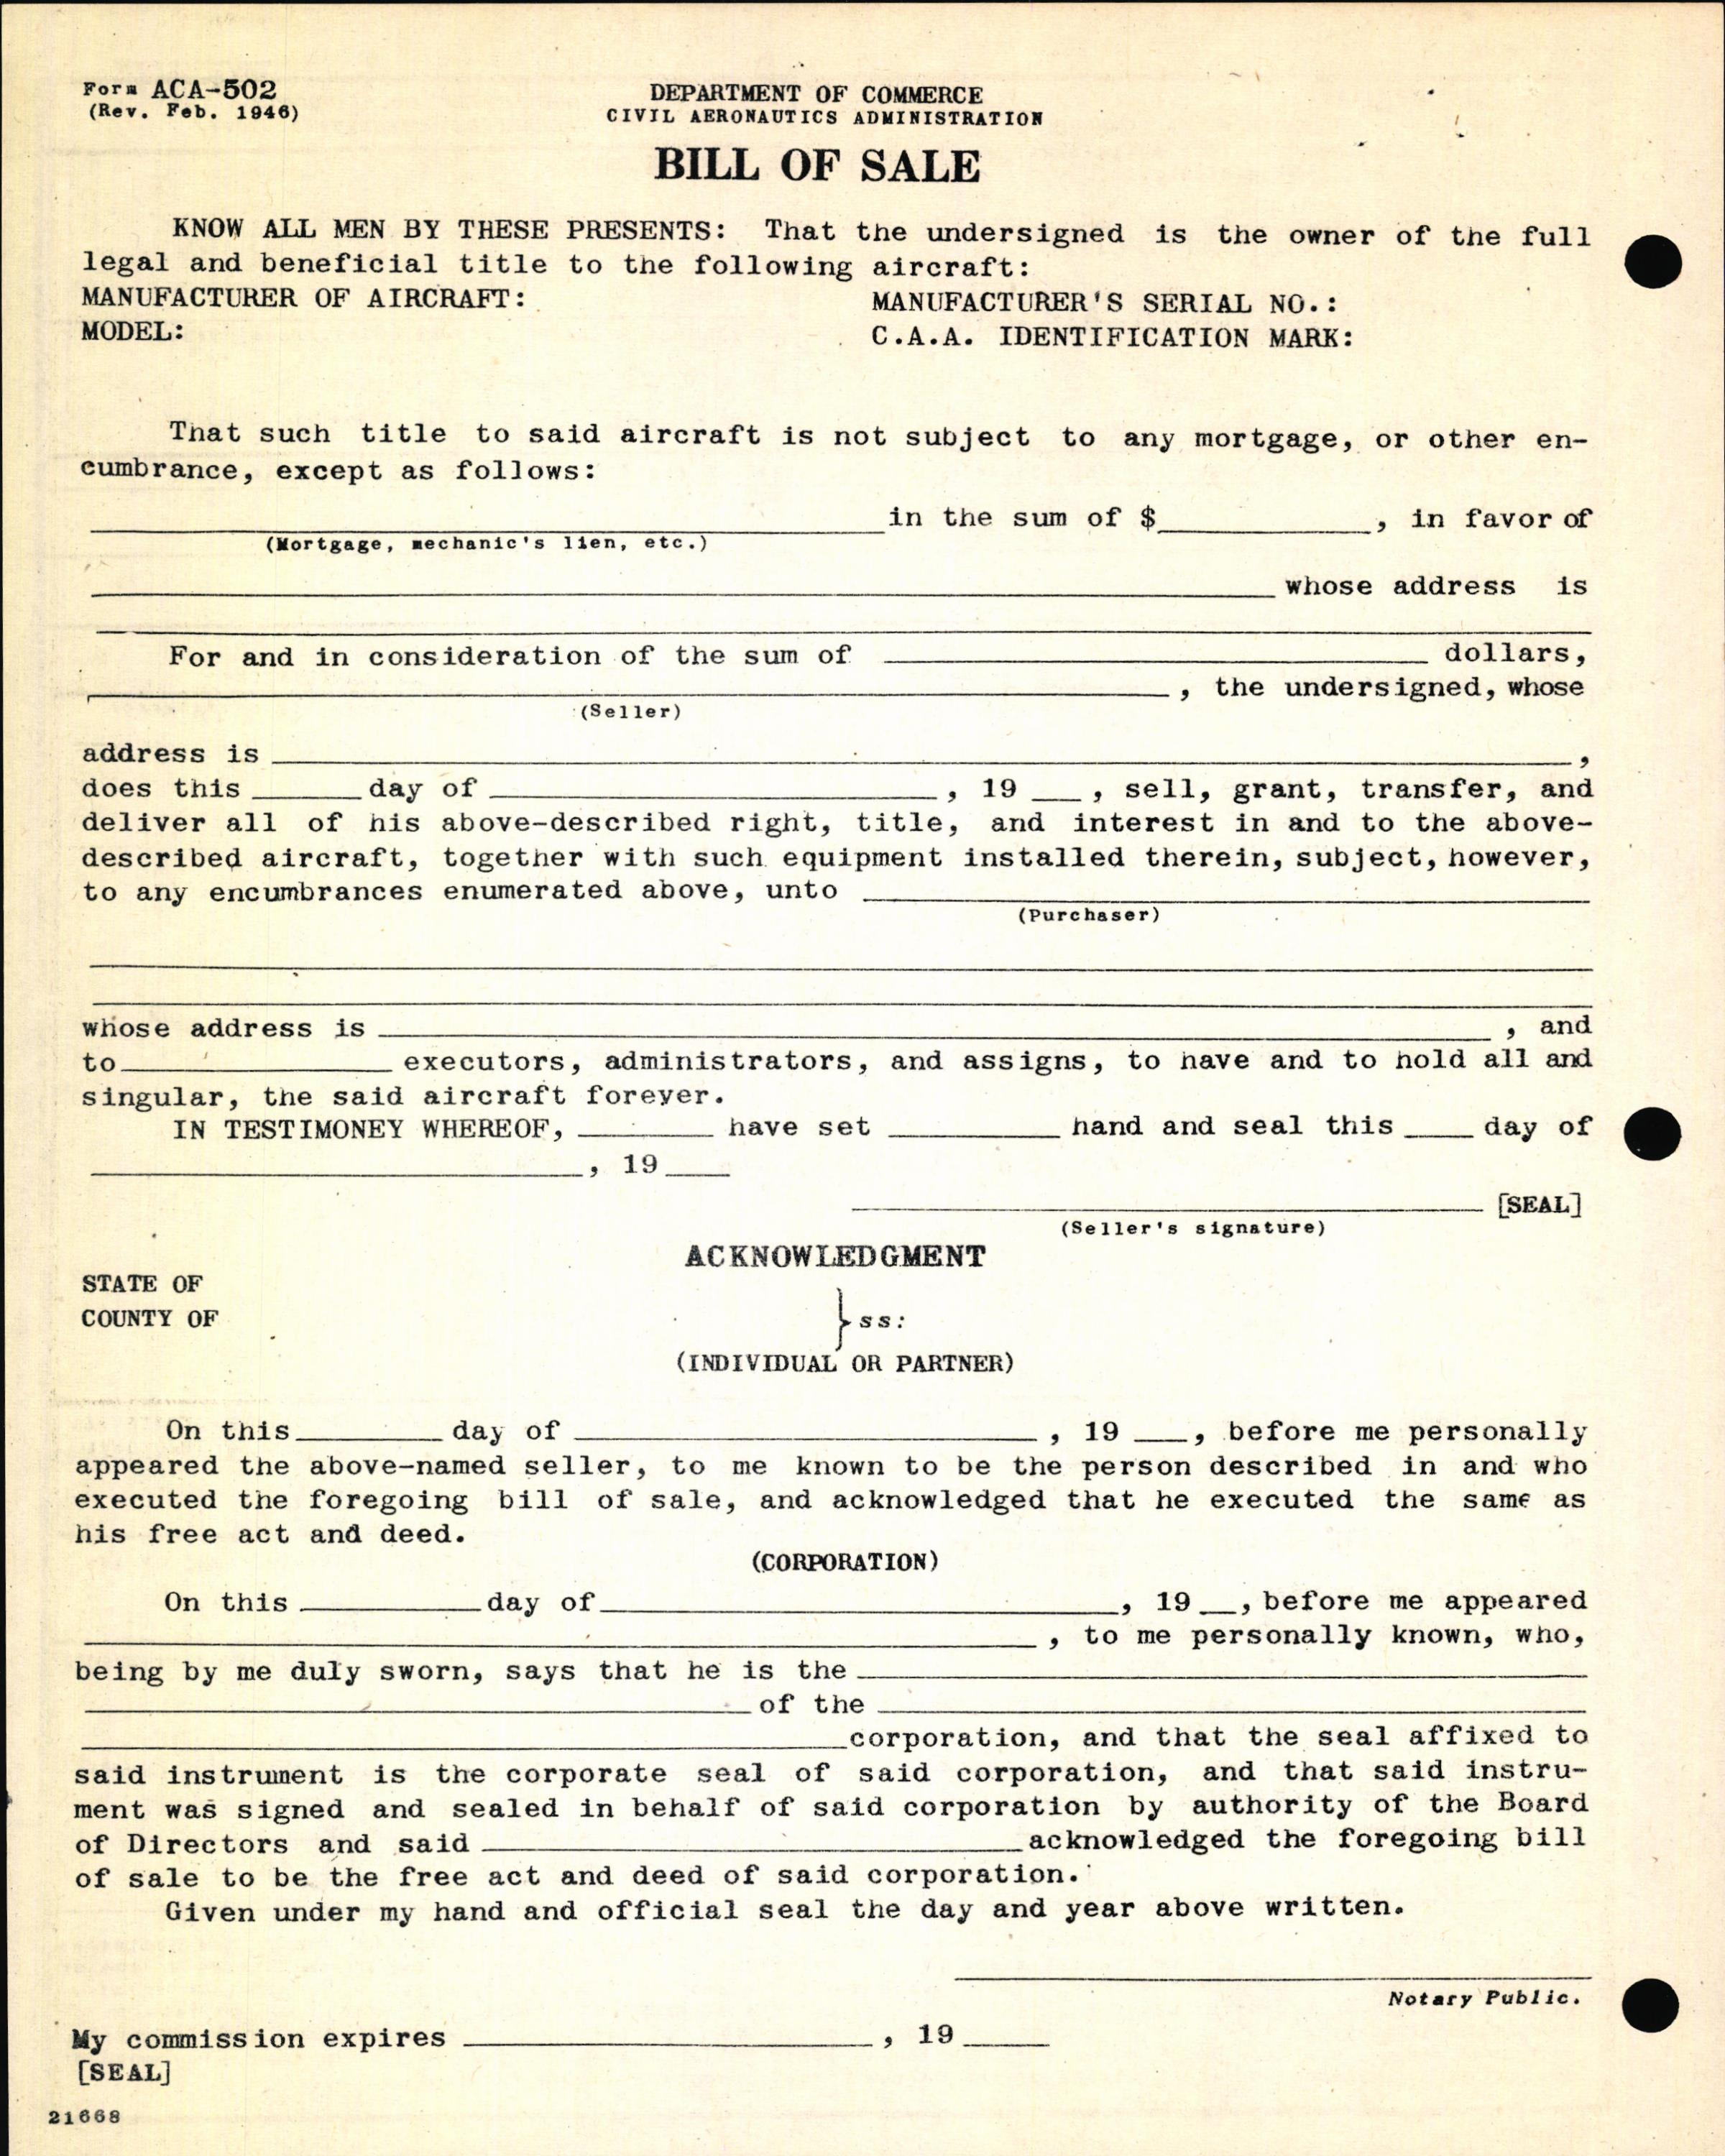 Sample page 6 from AirCorps Library document: Technical Information for Serial Number 1249